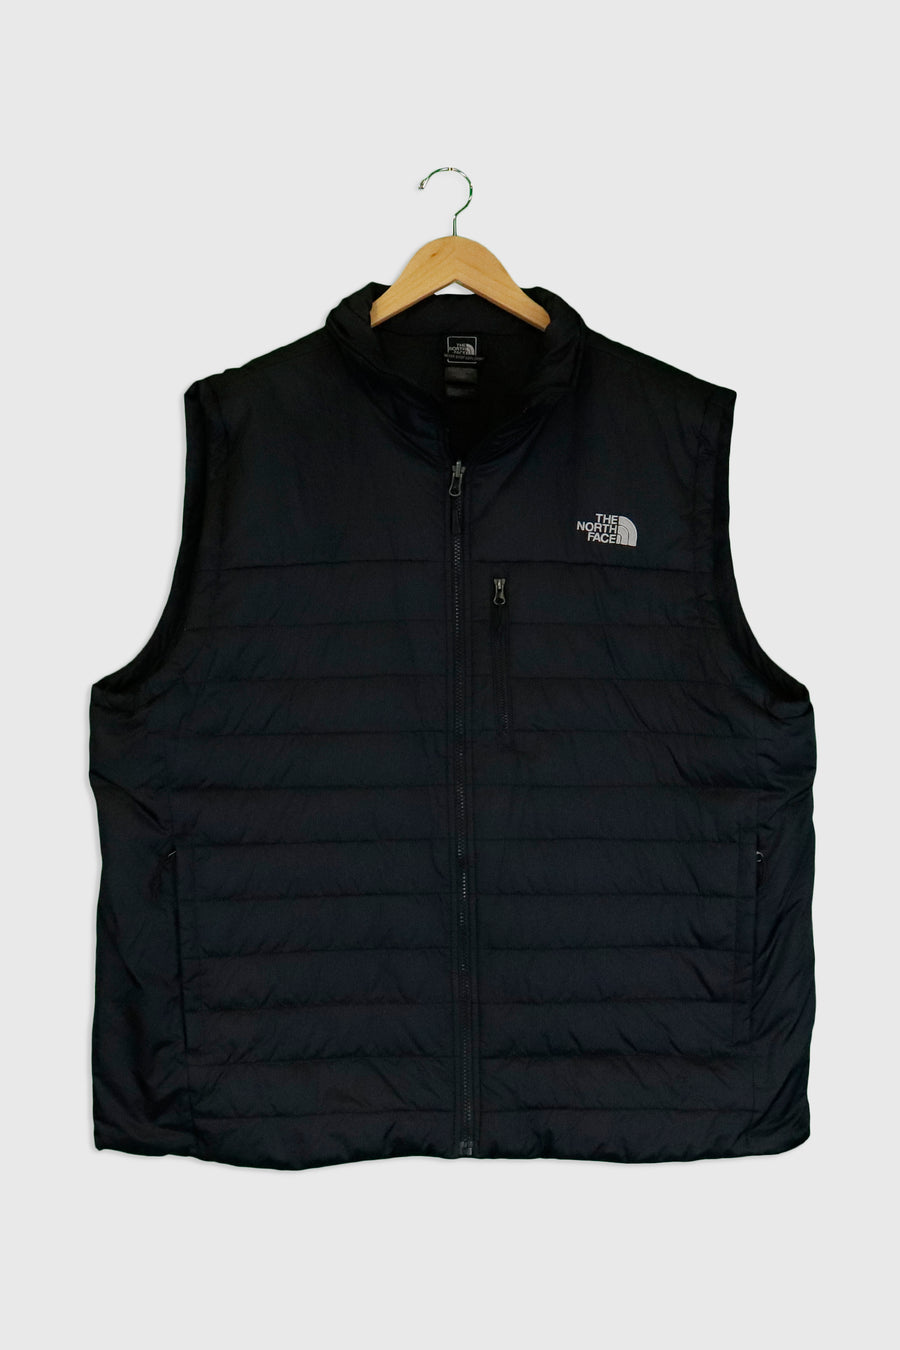 Vintage The North Face Quilted Full Zip Vest Sz 2XL